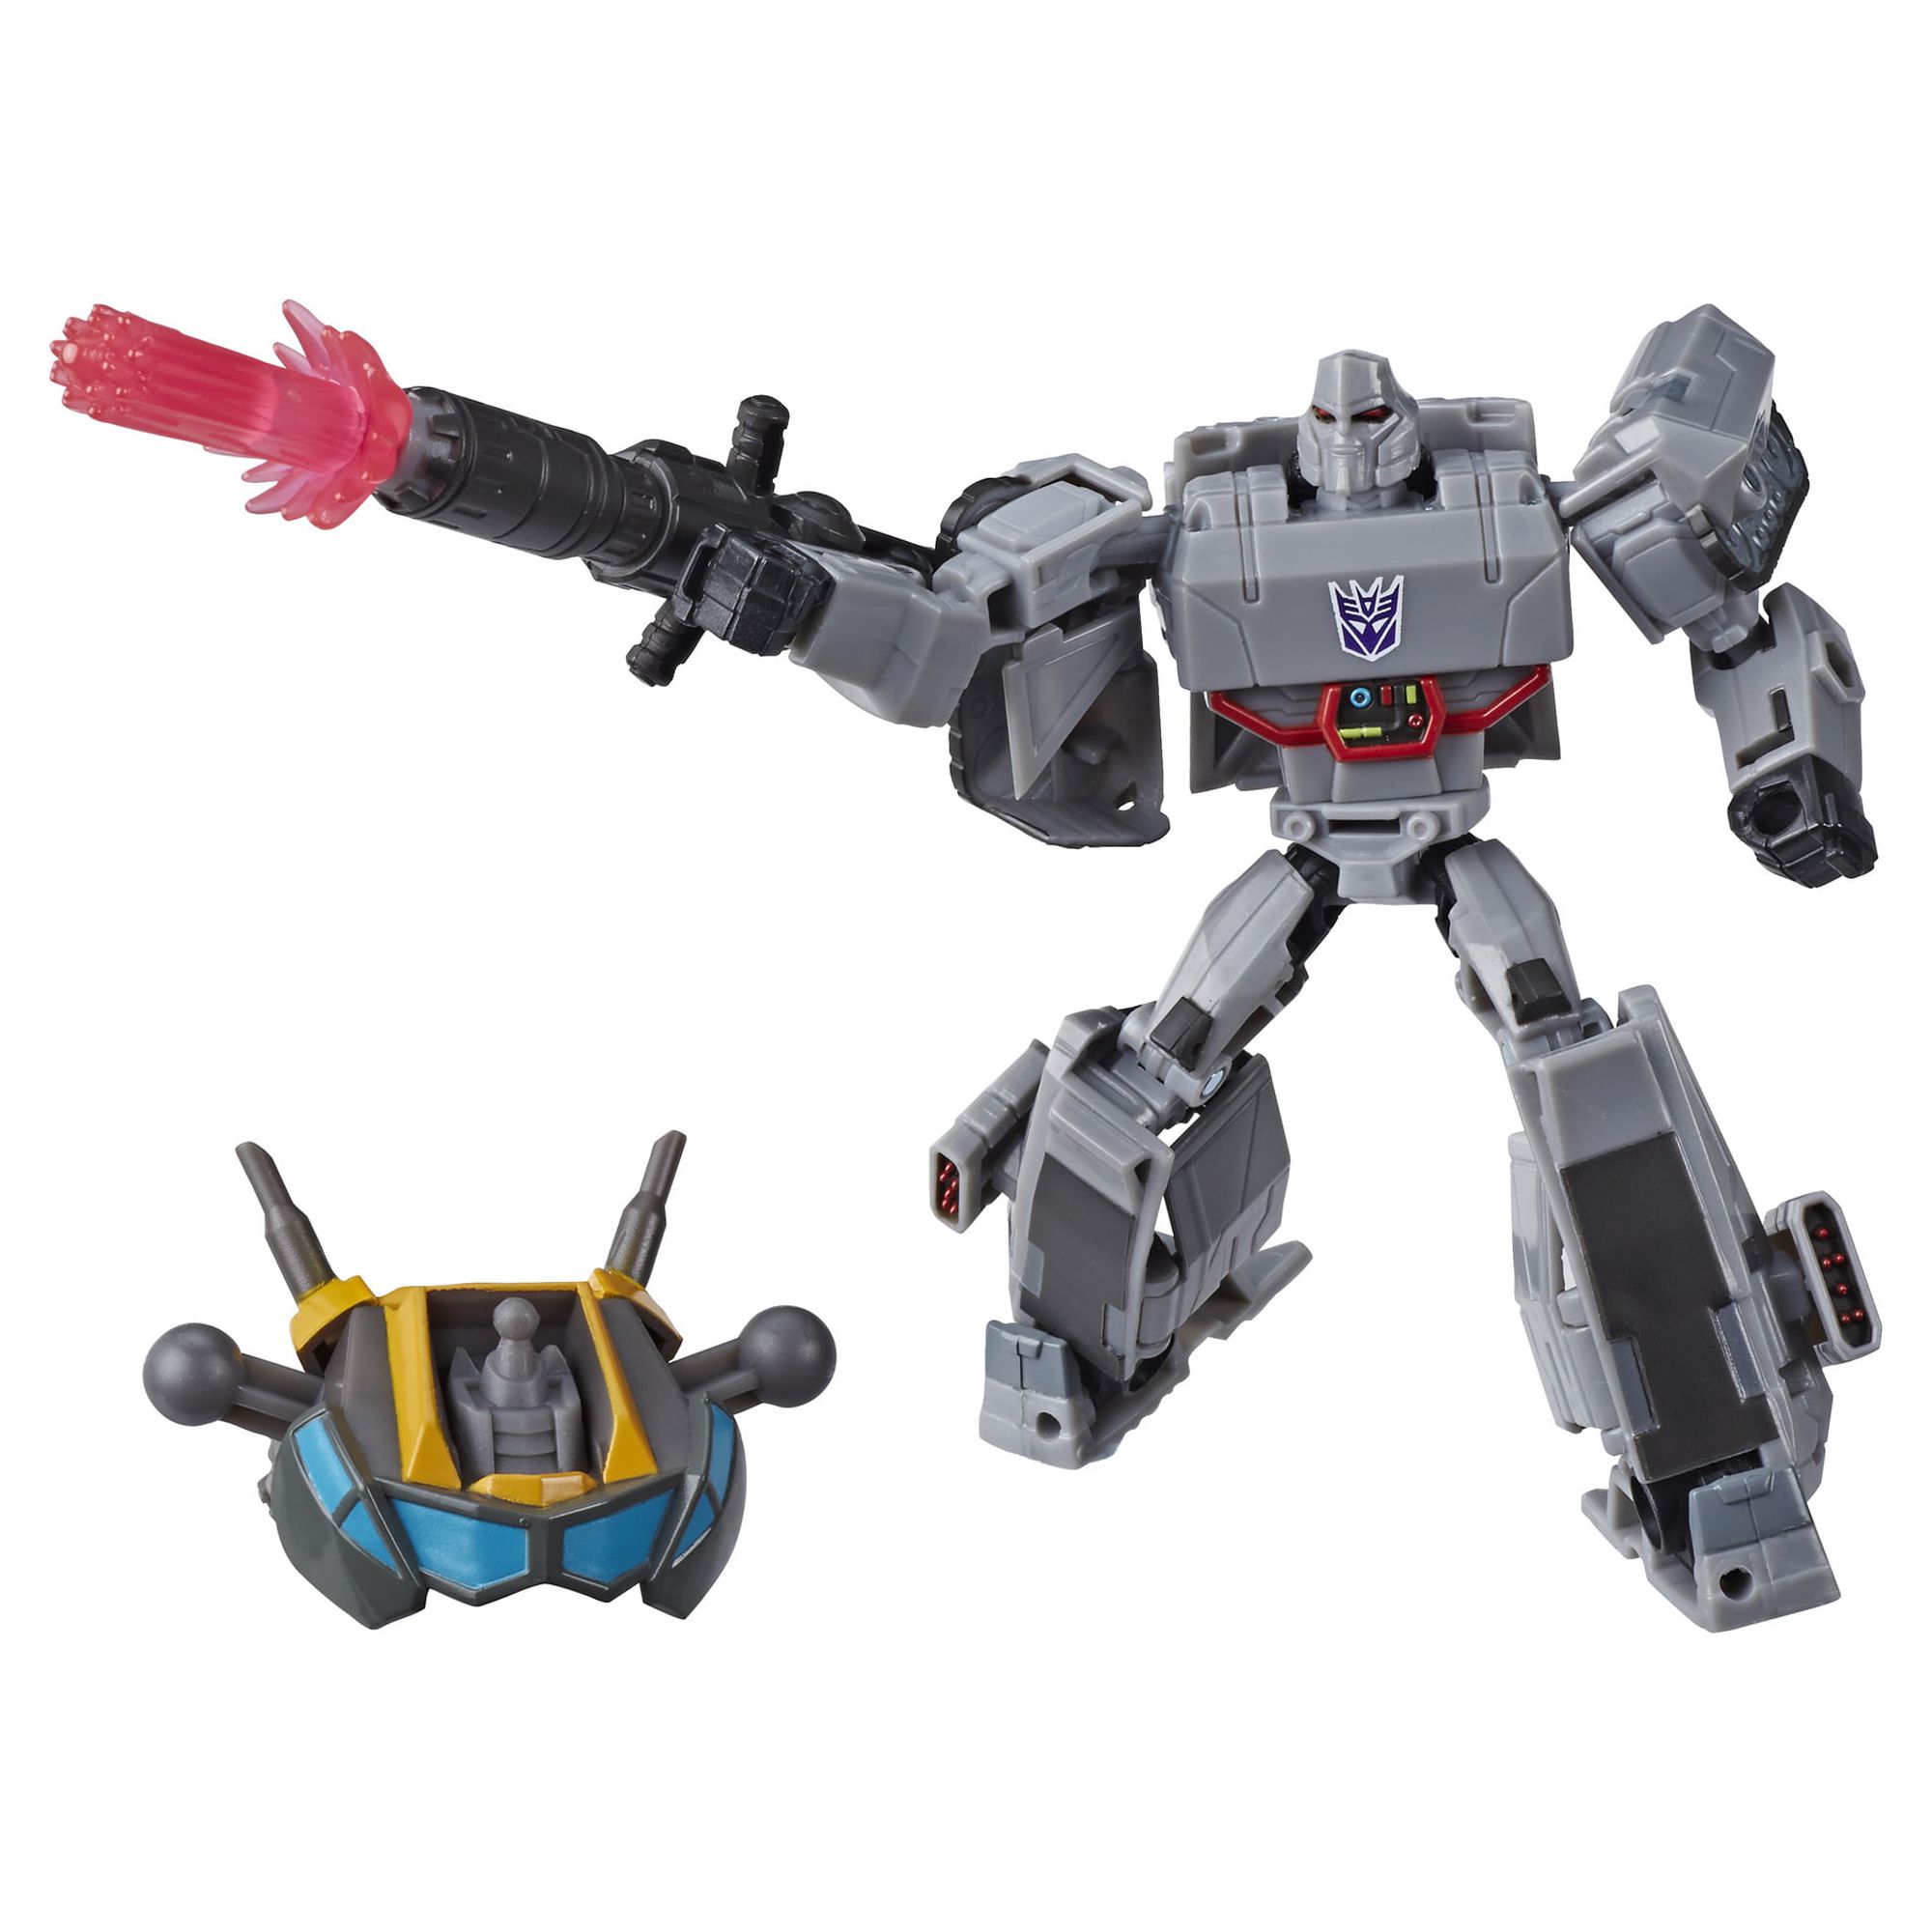 Transformers: Bumblebee Cyberverse Adventures Megatron Kids Toy Action Figure for Boys and Girls (5") - image 4 of 8